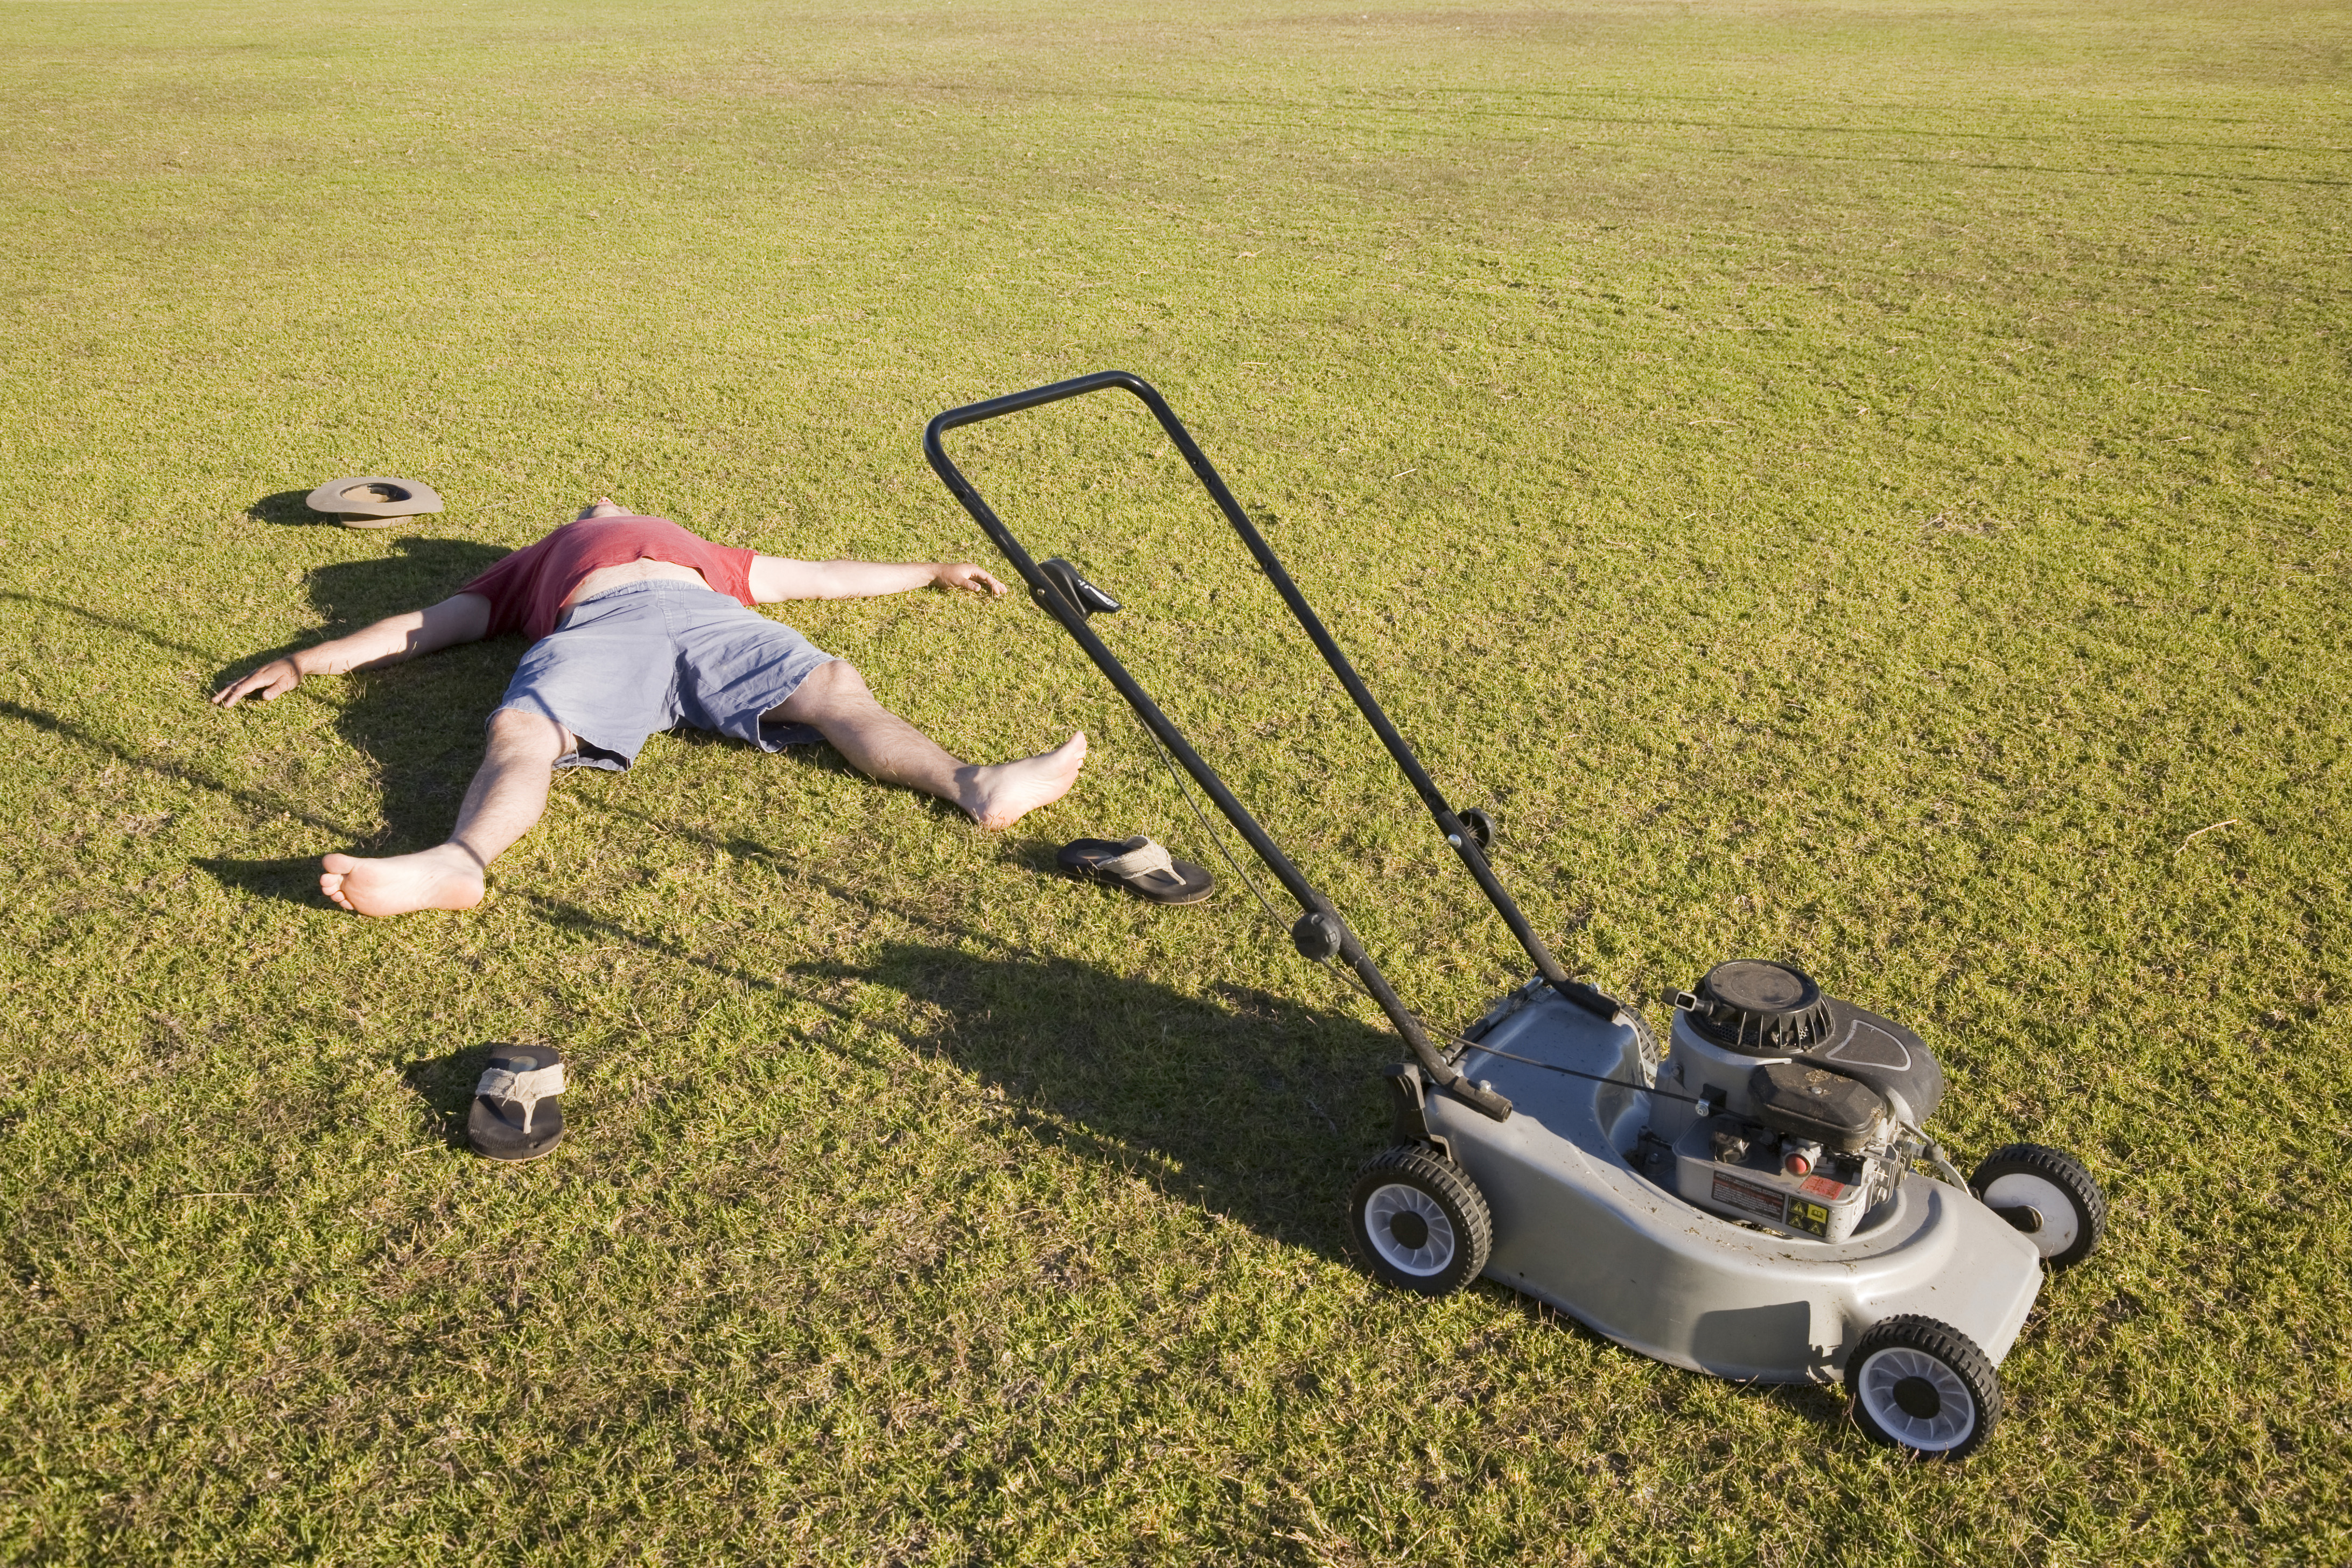 mowing injuries,environmental impact of mowing,lawn mowing gas consumption,mowi...